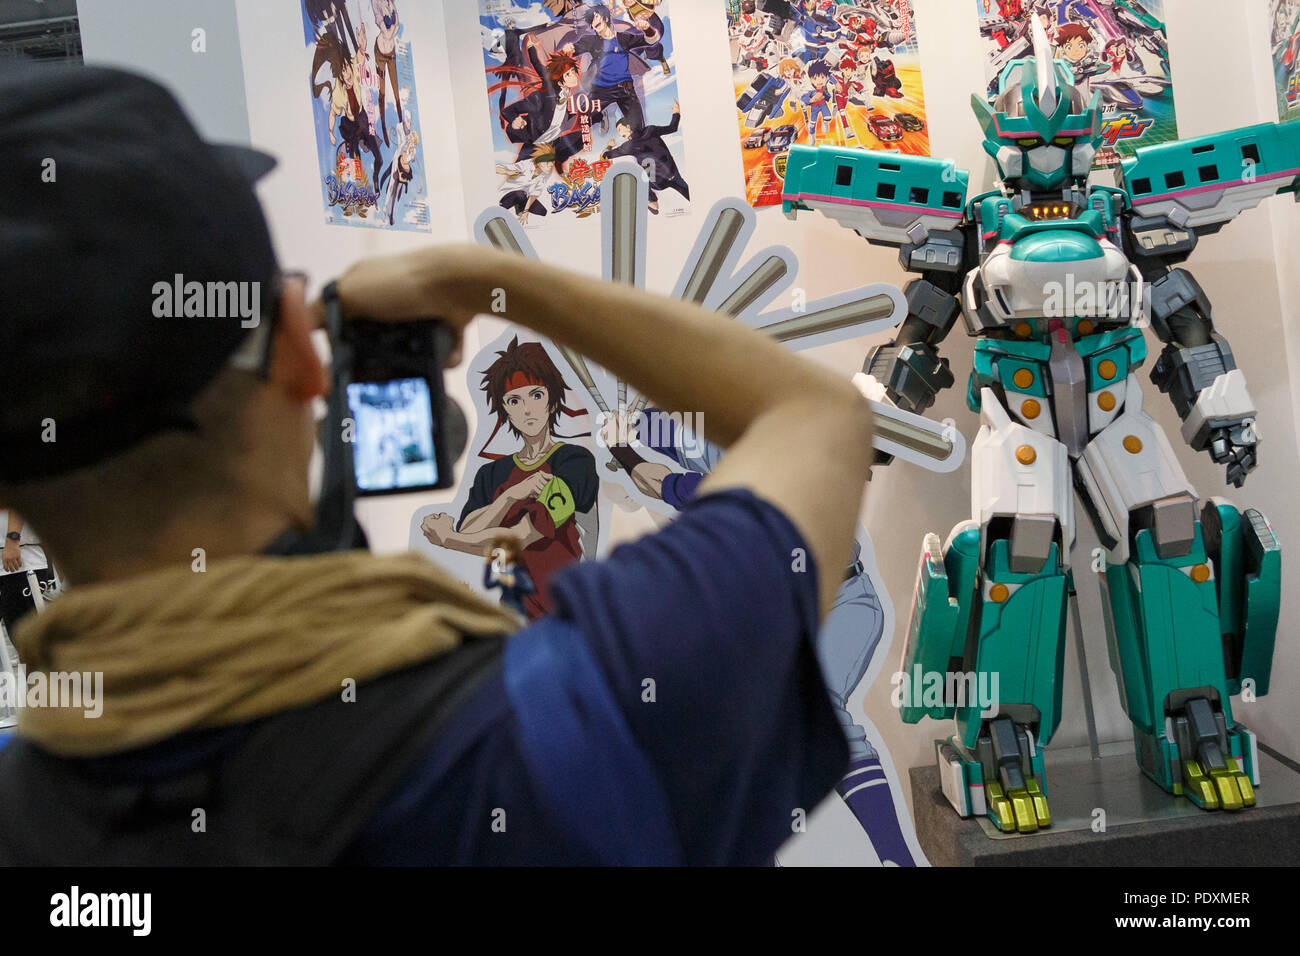 Tokyo, Japan, 11 Aug 2018. A man takes a picture of a bullet train robot  during the Comic Market 94 (Comiket) event at Tokyo Big Sight on August 11,  2018, Tokyo, Japan.